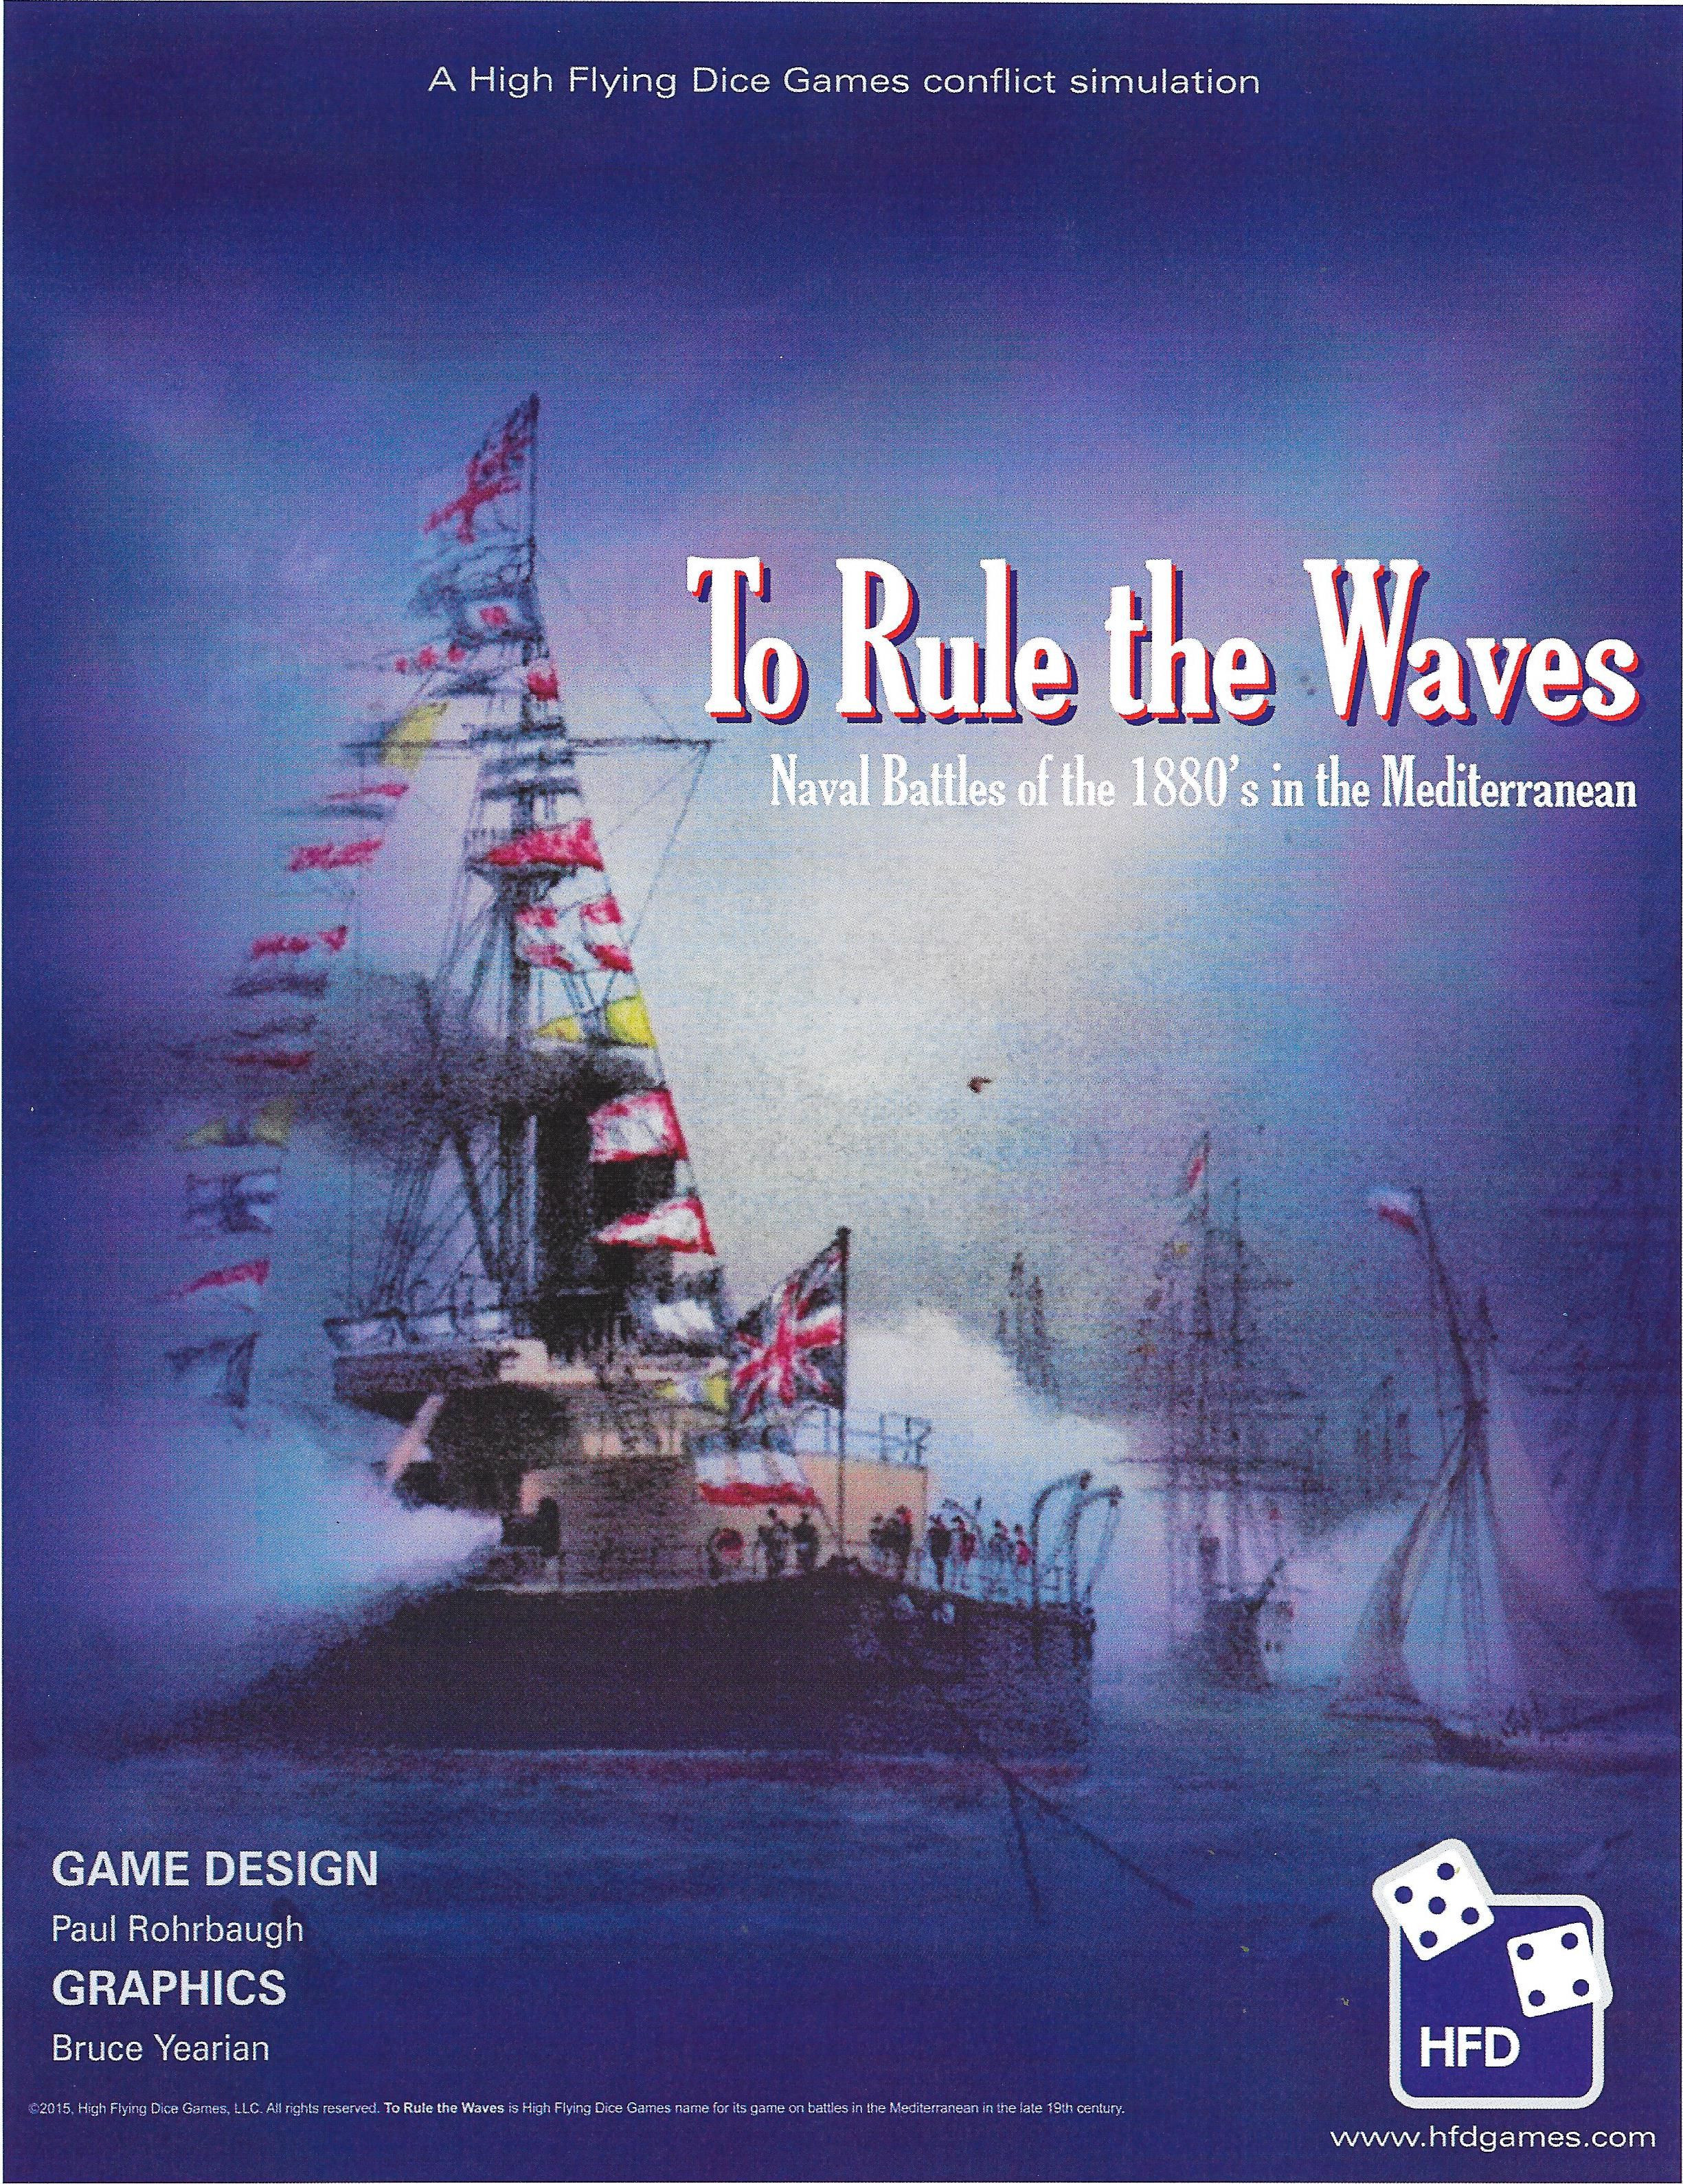 To Rule the Waves: Naval Battles in the Mediterranean in the 1880s.